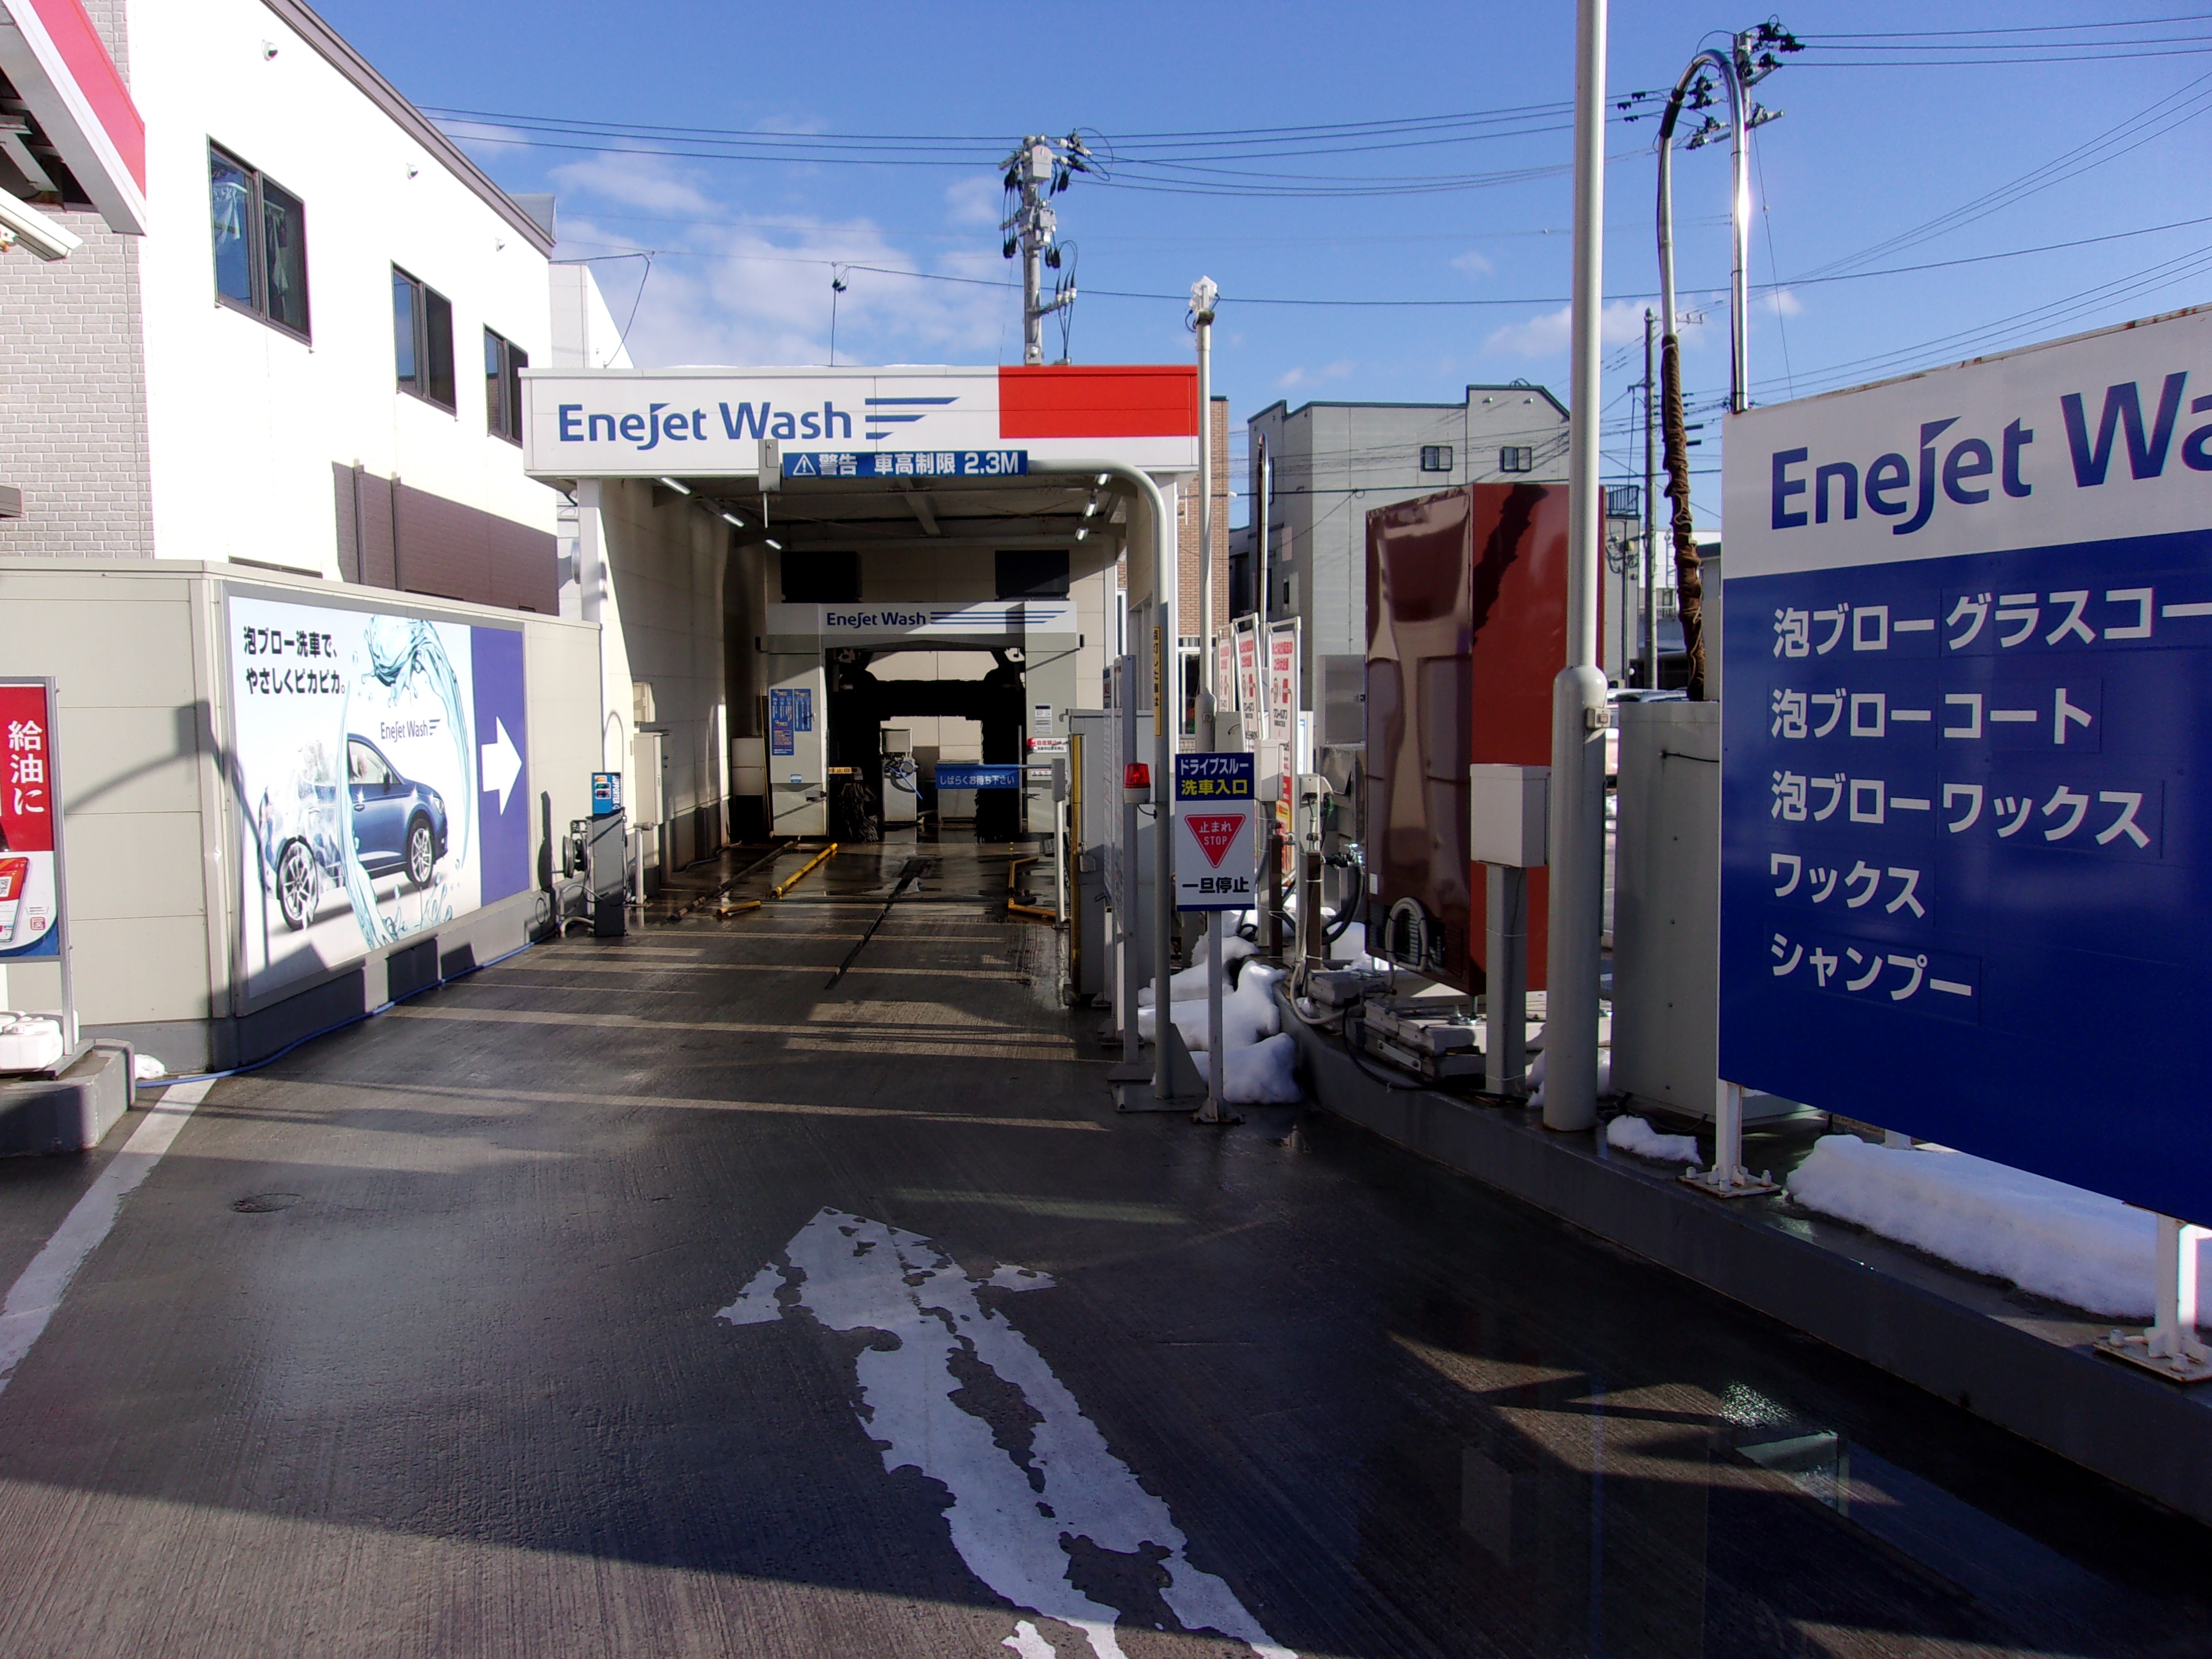 Images ENEOS Dr.Driveセルフ青森橋本店(ENEOSフロンティア)